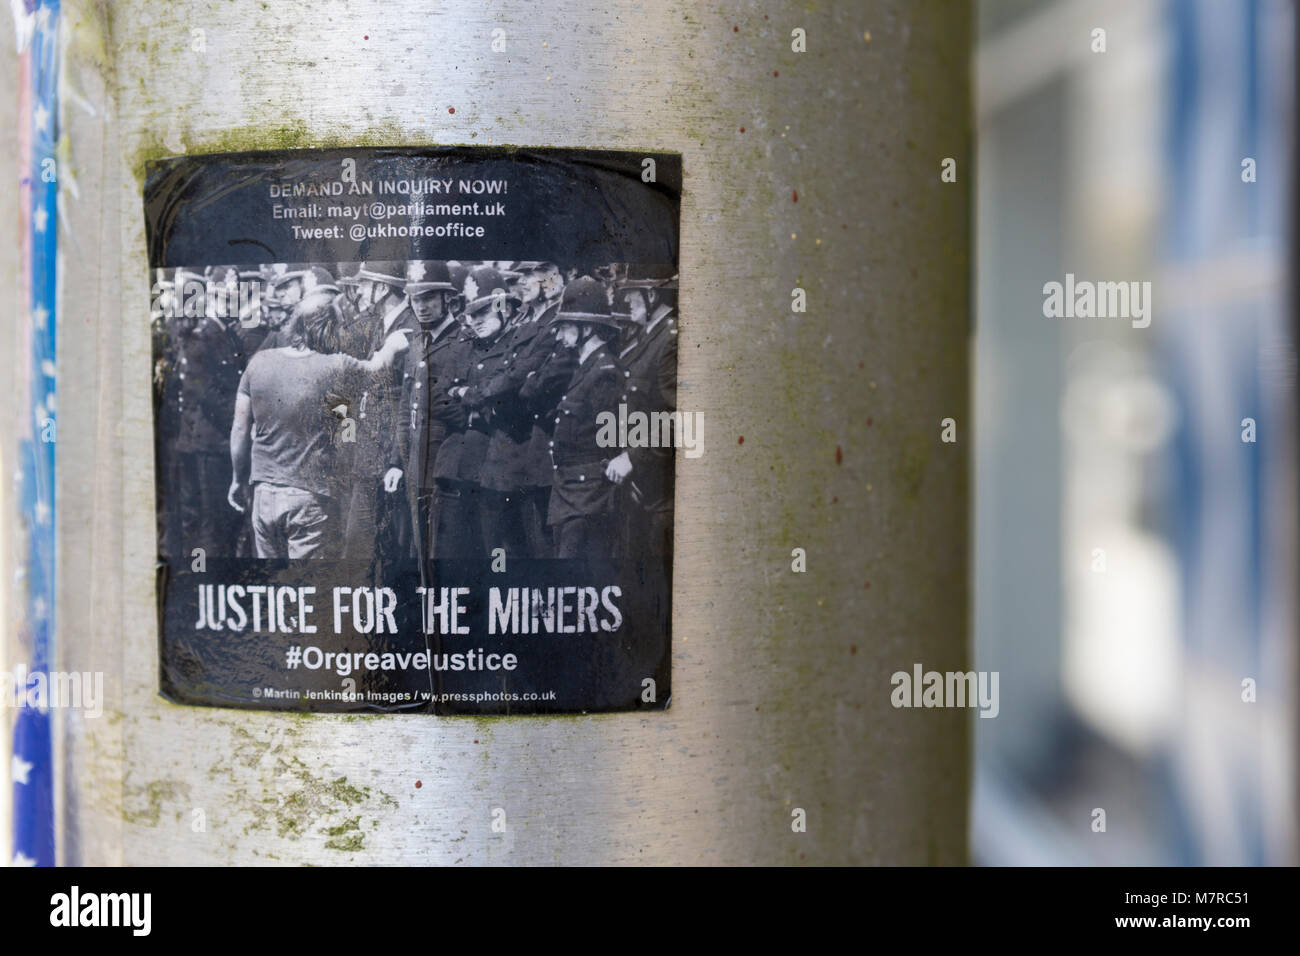 Sticker on lamp post demanding justice and inquiry for Orgreave miners Stock Photo